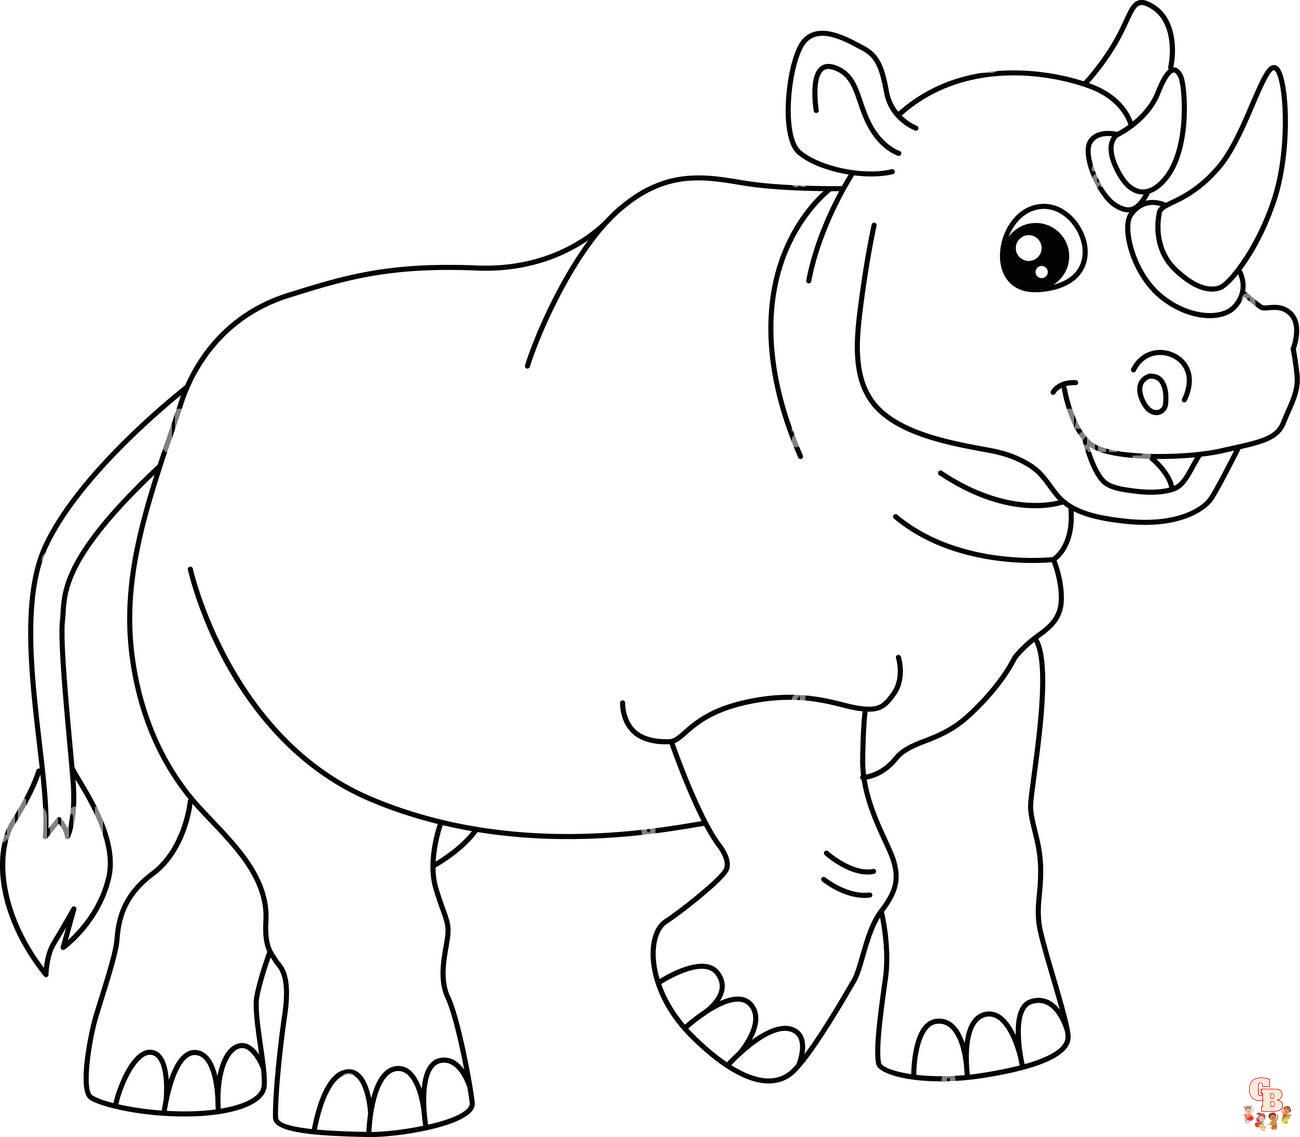 Rhino Coloring Pages 5